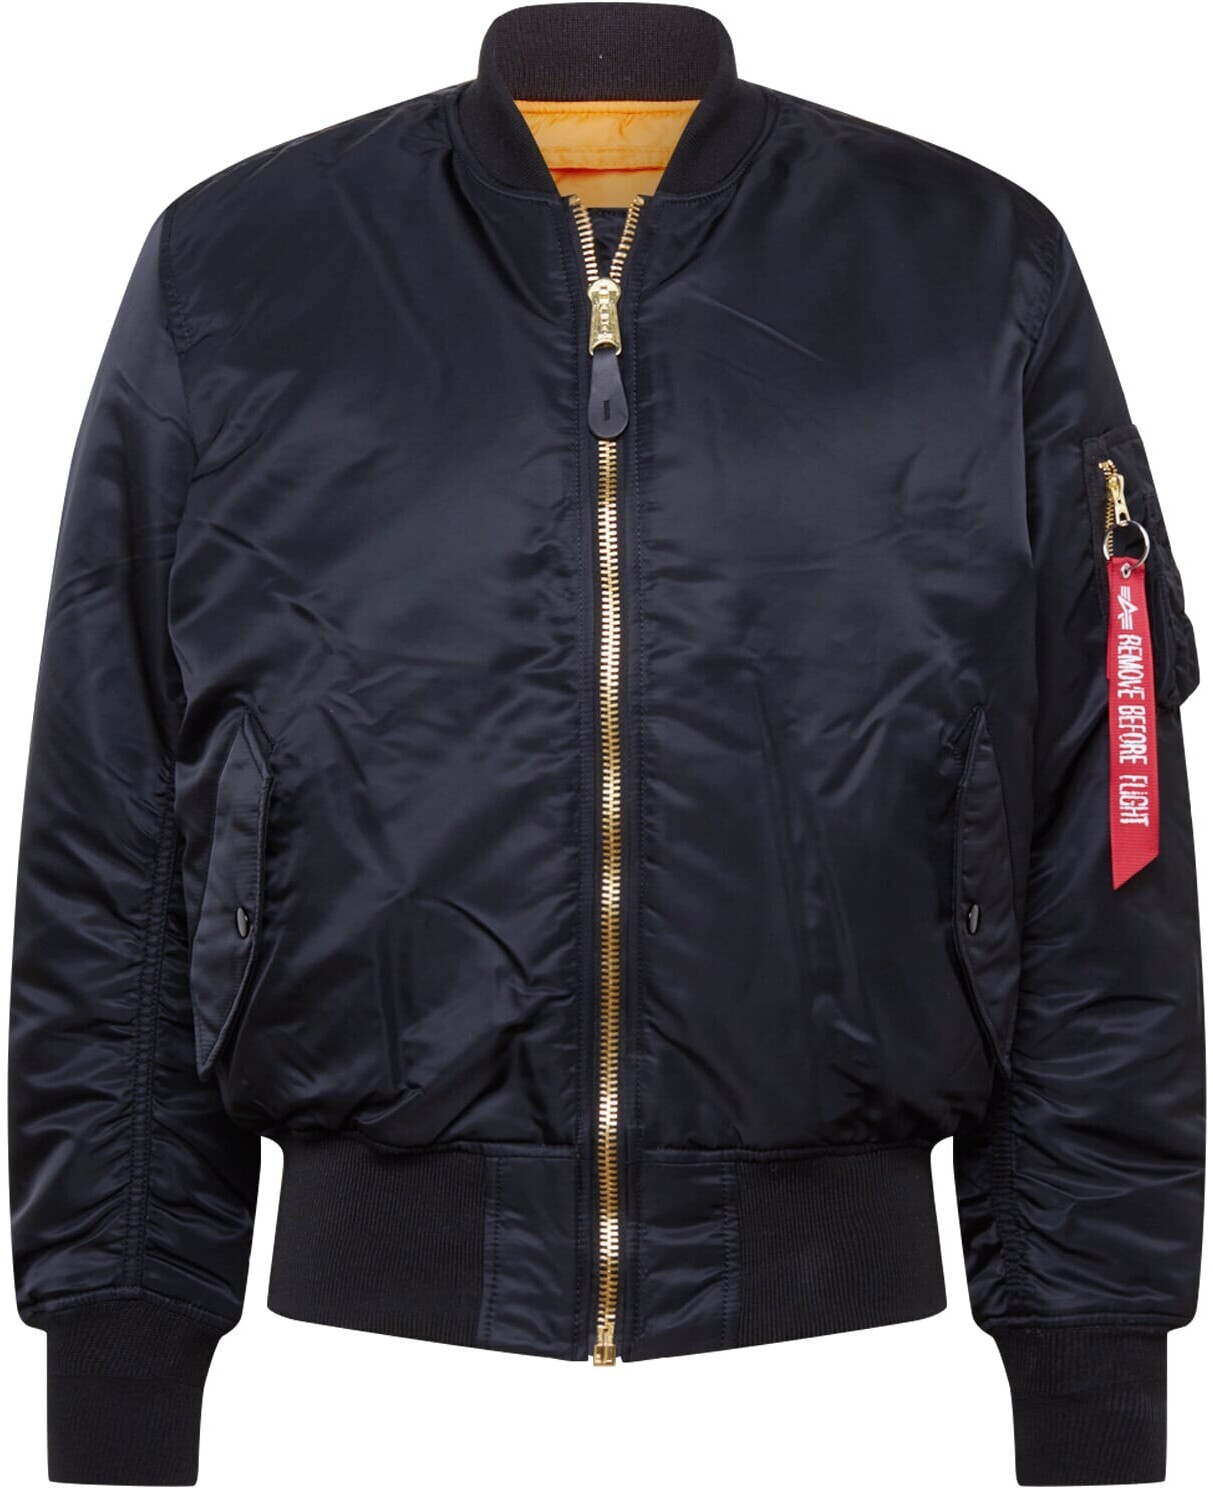 Buy Alpha Industries MA-1 black (100101-03) from £94.98 (Today) – Best ...